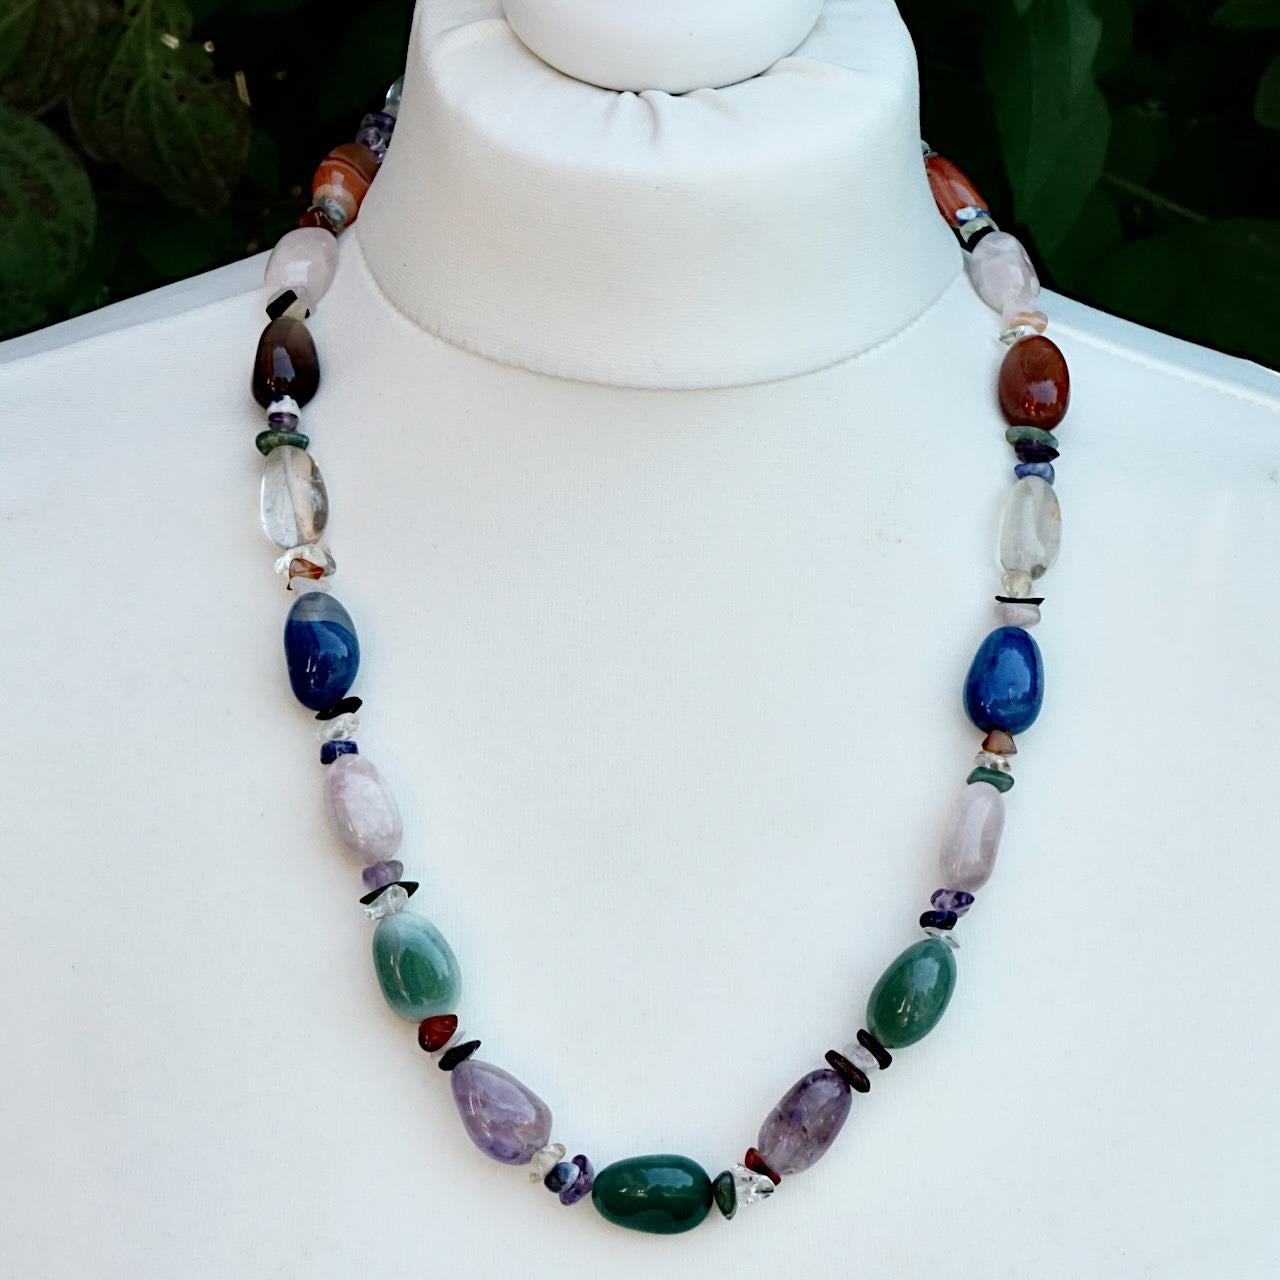 Fabulous gemstone necklace with a silver tone barrel clasp. The beautiful polished gemstones include rose quartz, amethyst and agate. The large beads are interspersed with sets of three smaller beads. Measuring length 62 cm / 24.4 inches.

This is a